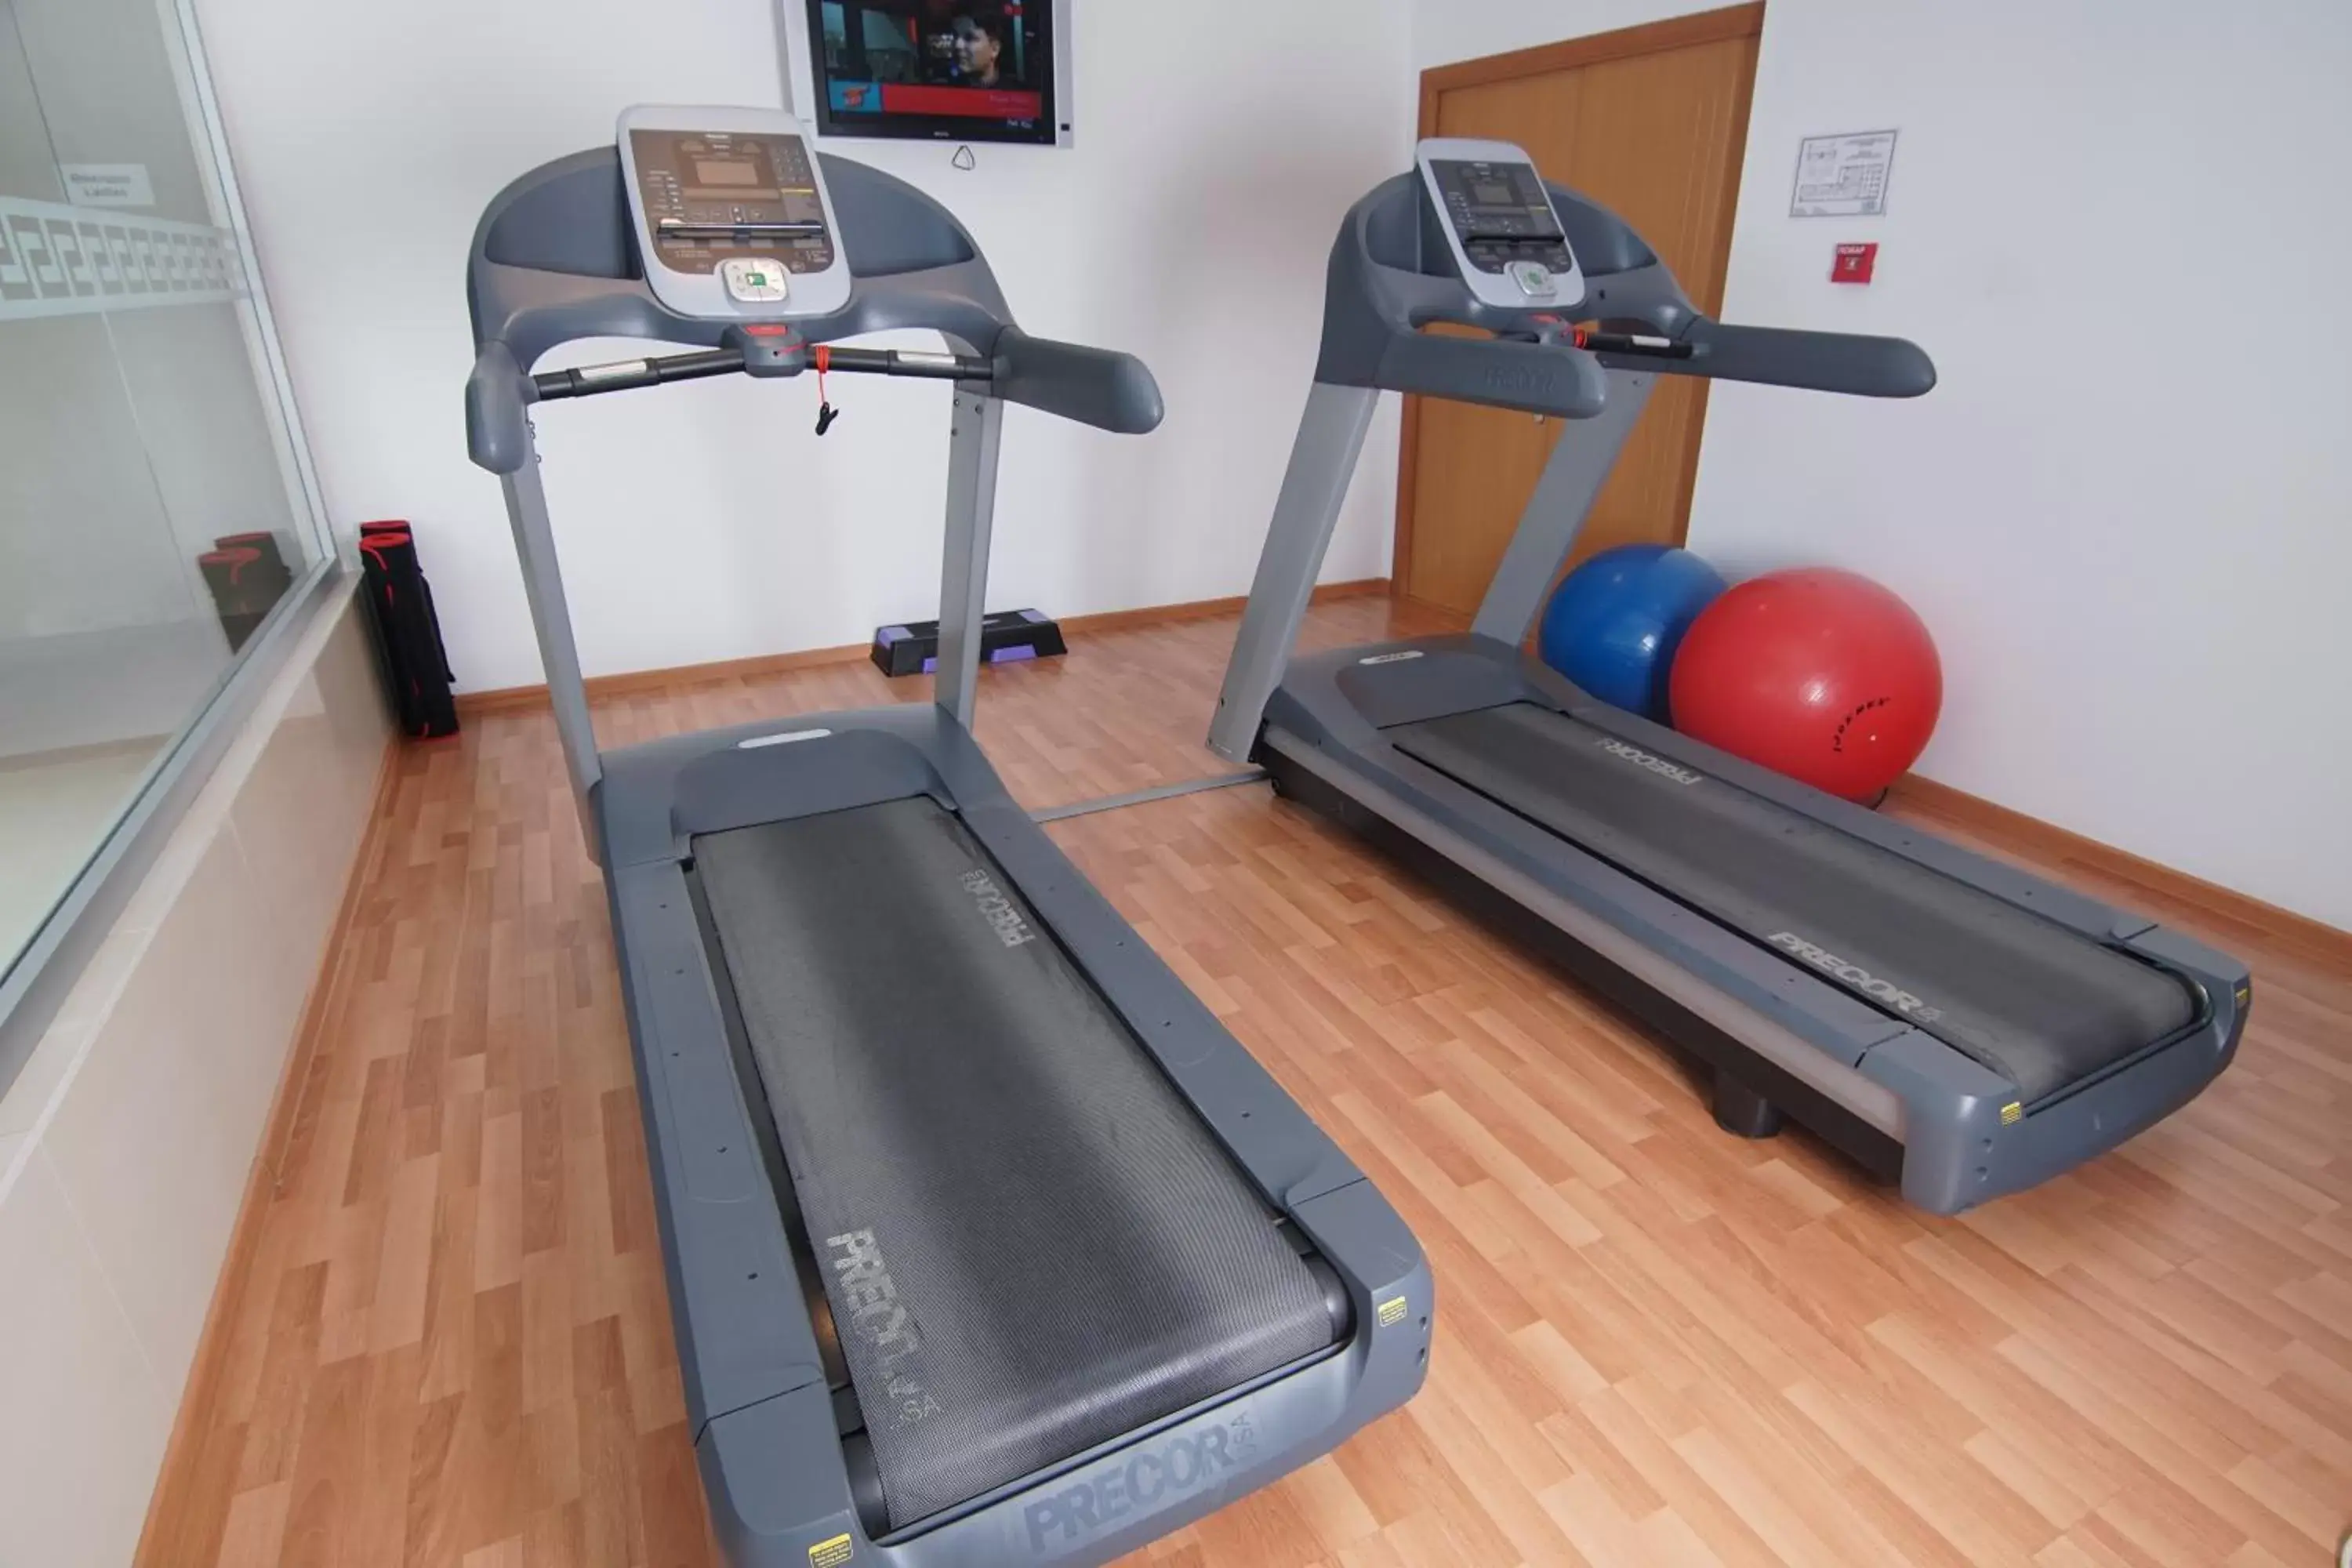 Fitness centre/facilities, Fitness Center/Facilities in The Dostyk Hotel